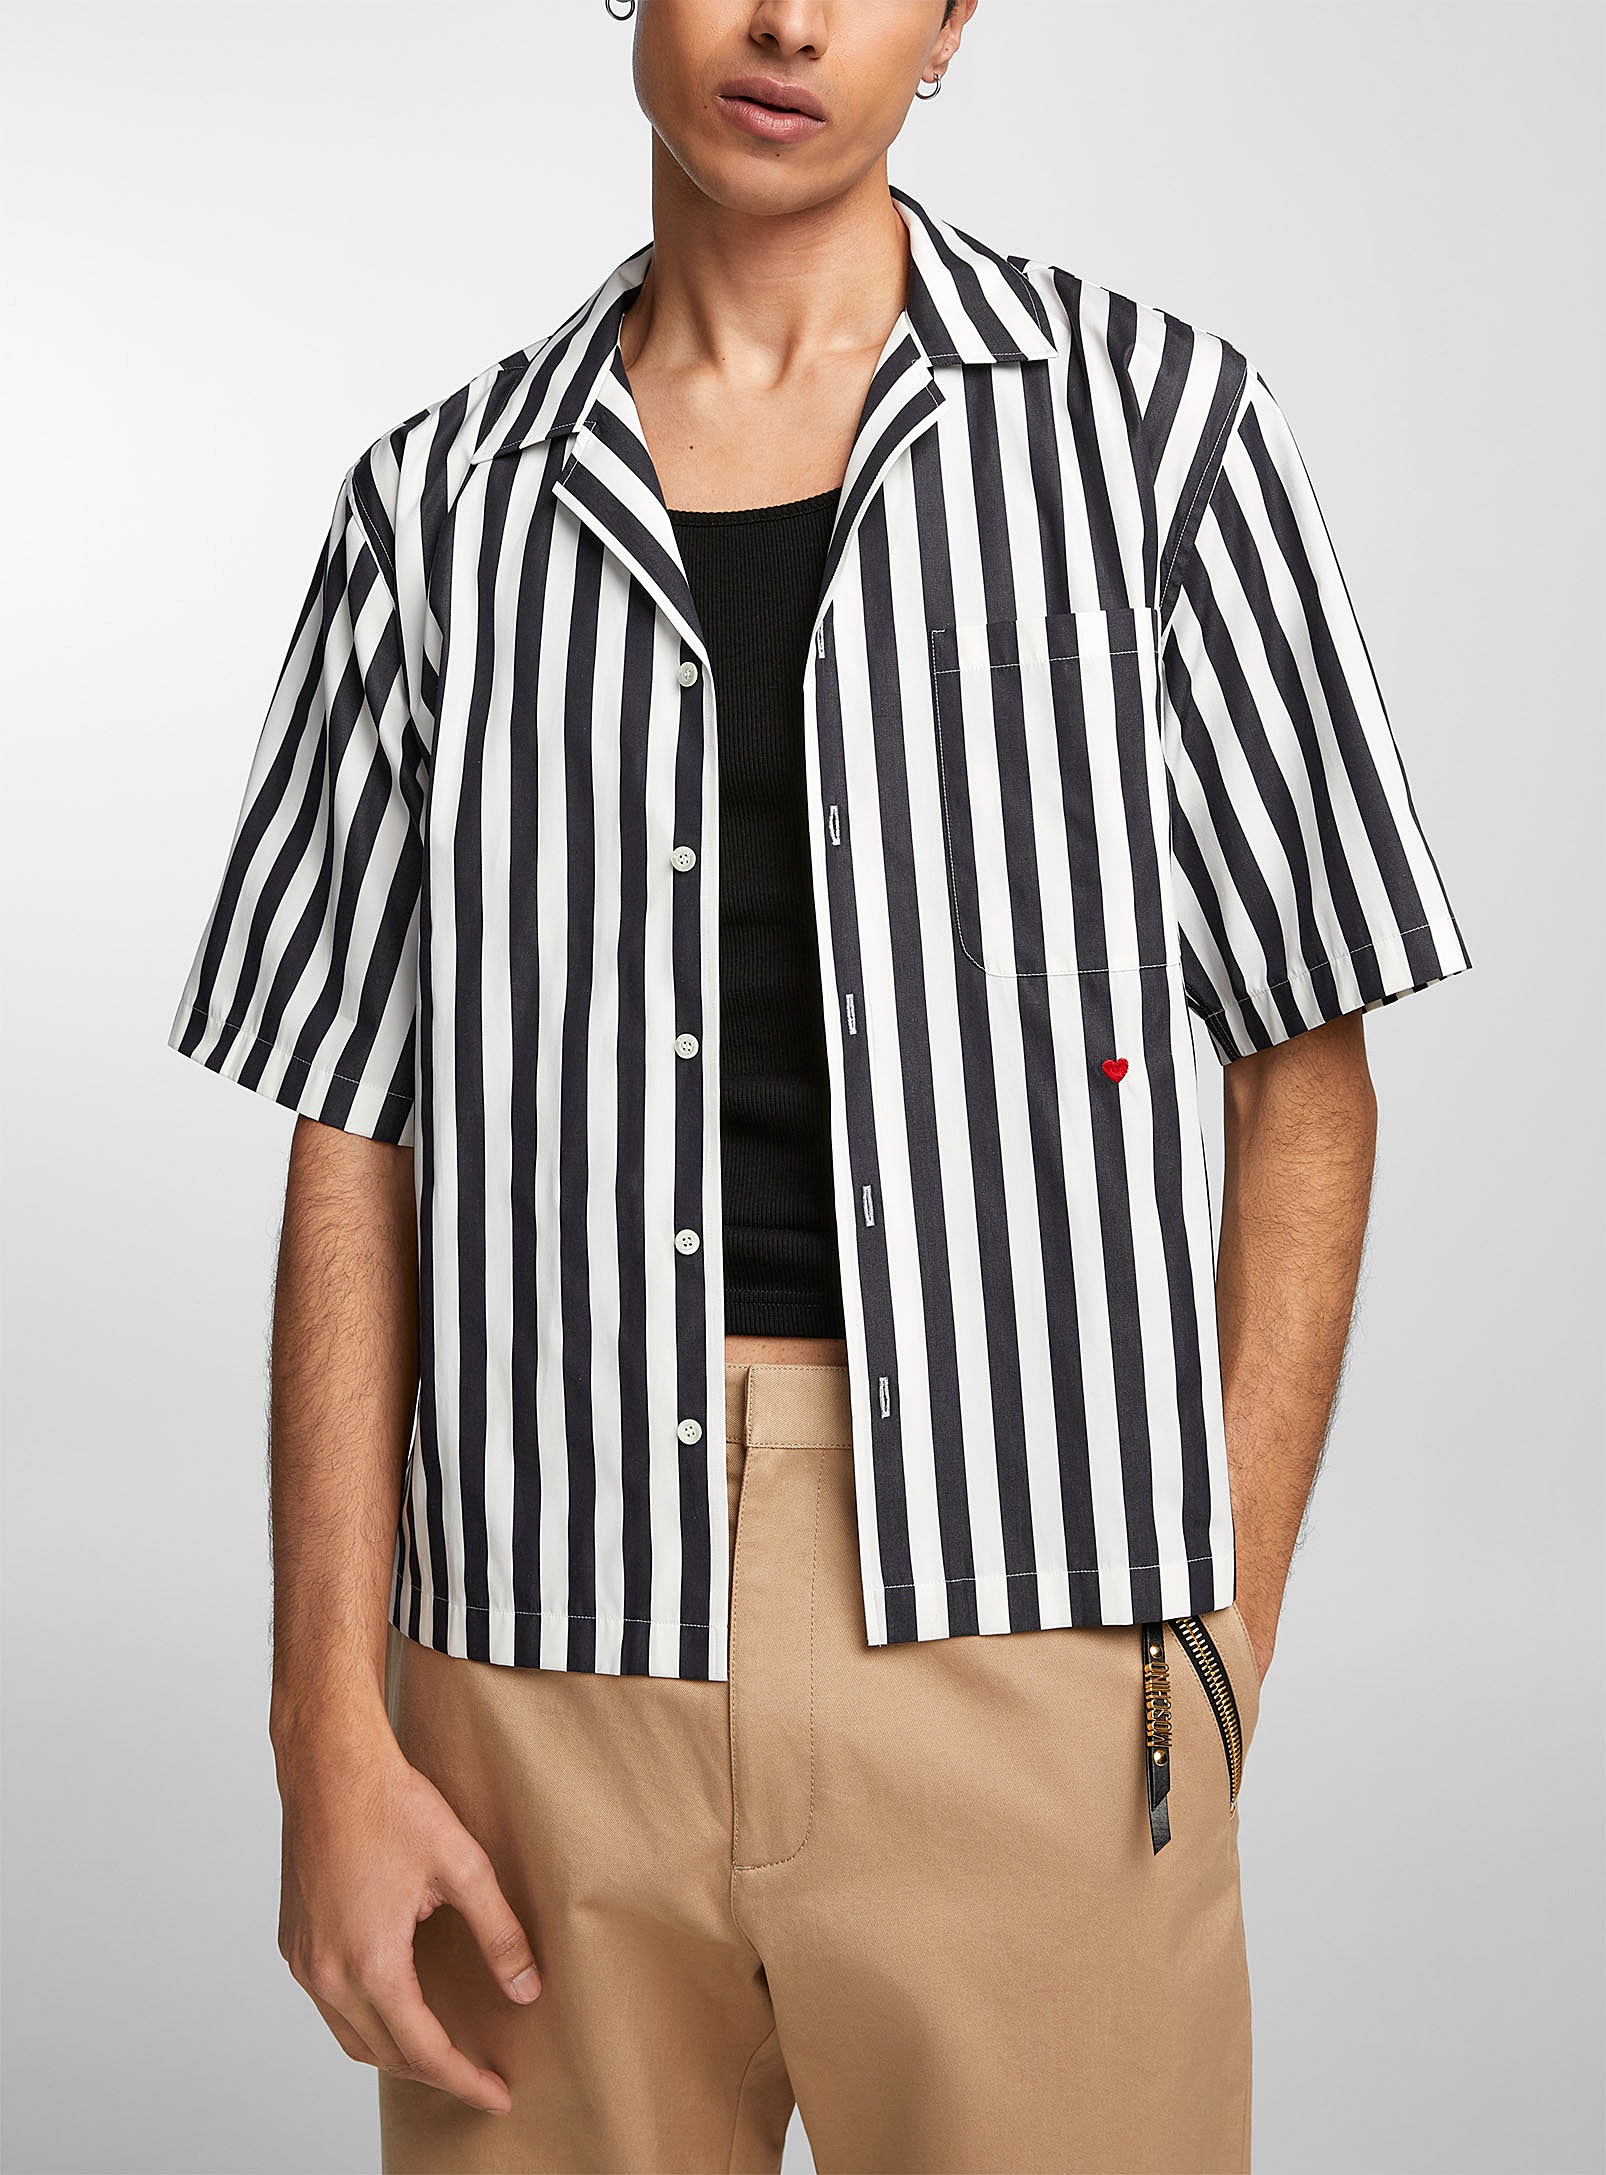 Moschino Contrasting Lines Shirt In Patterned Black